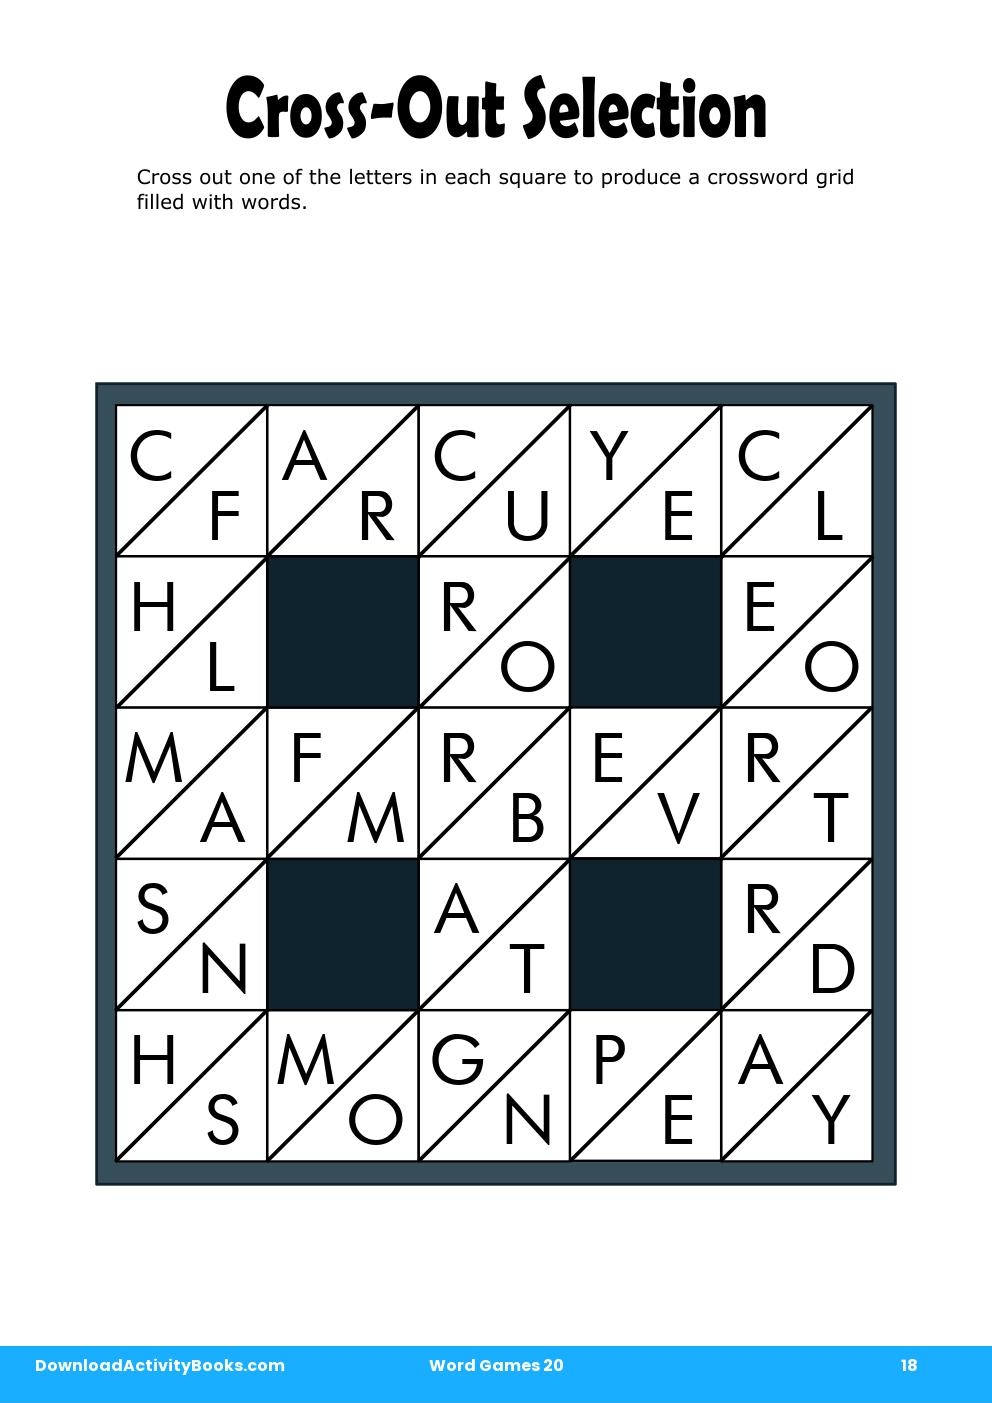 Cross-Out Selection in Word Games 20